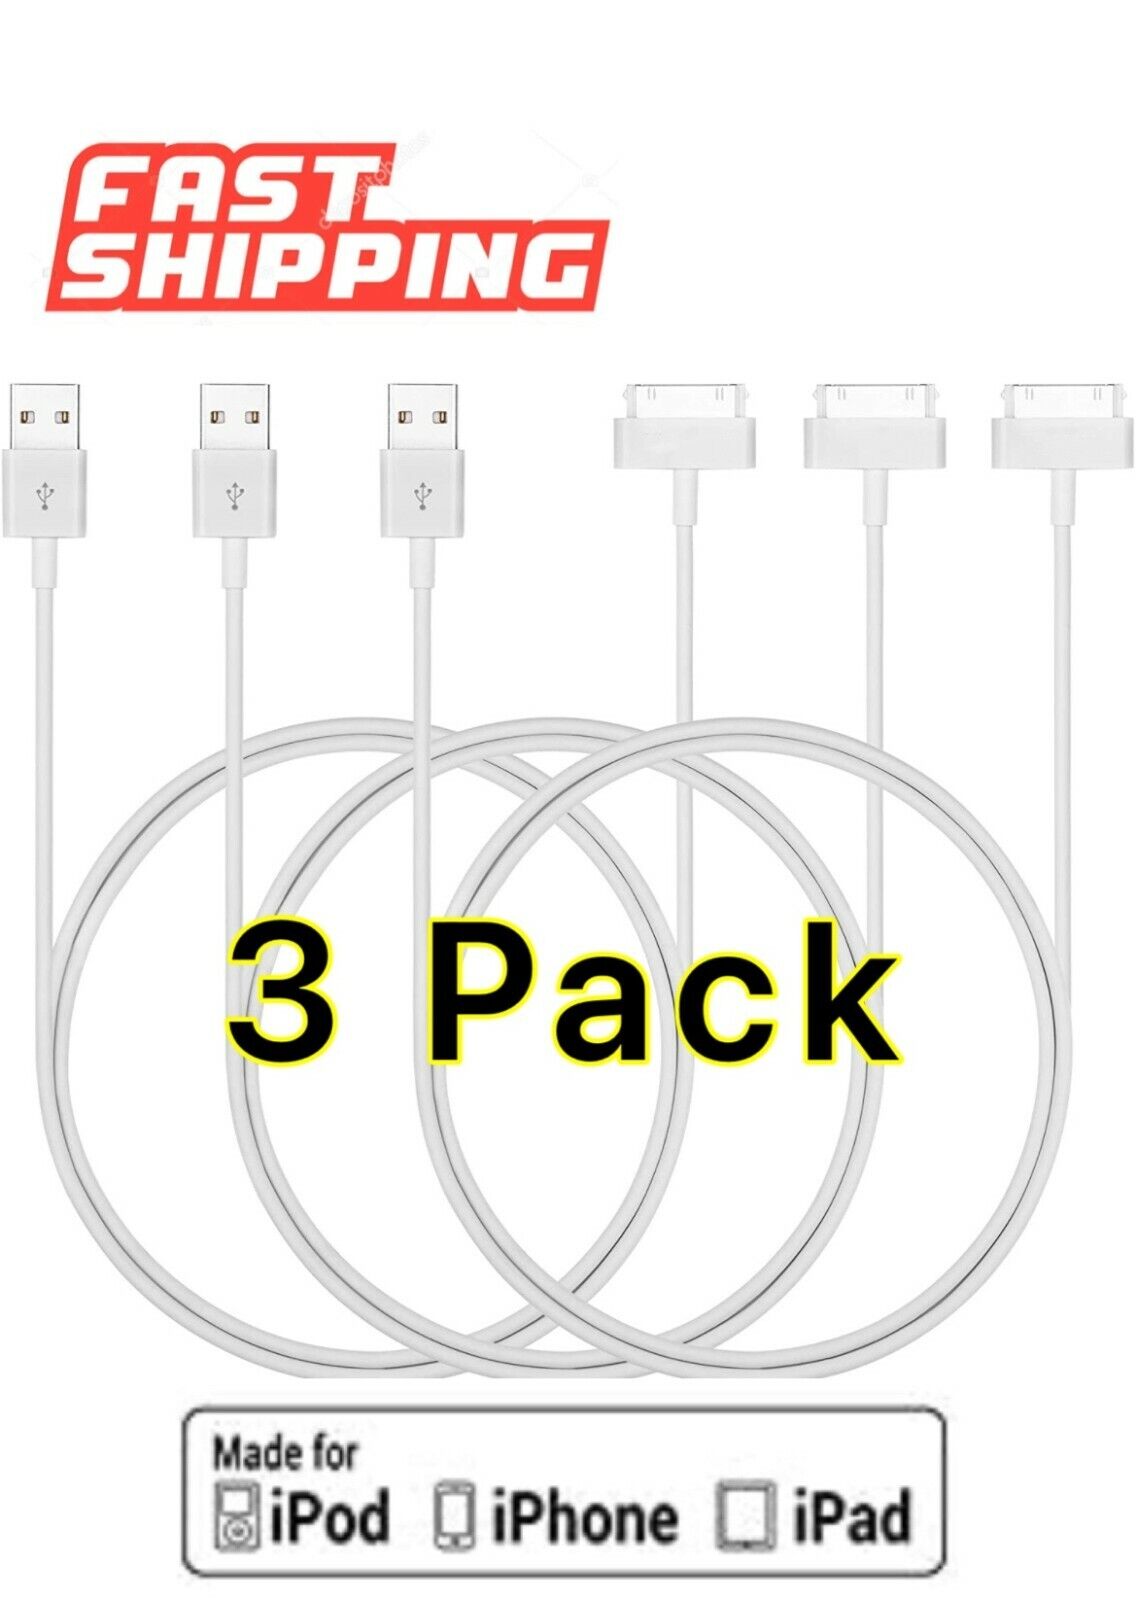 3Pack 30 pin USB Charging Data/Sync Cable Cord for iPad 1/2/3 iPod Nano 1-6 easybuystation Does Not Apply